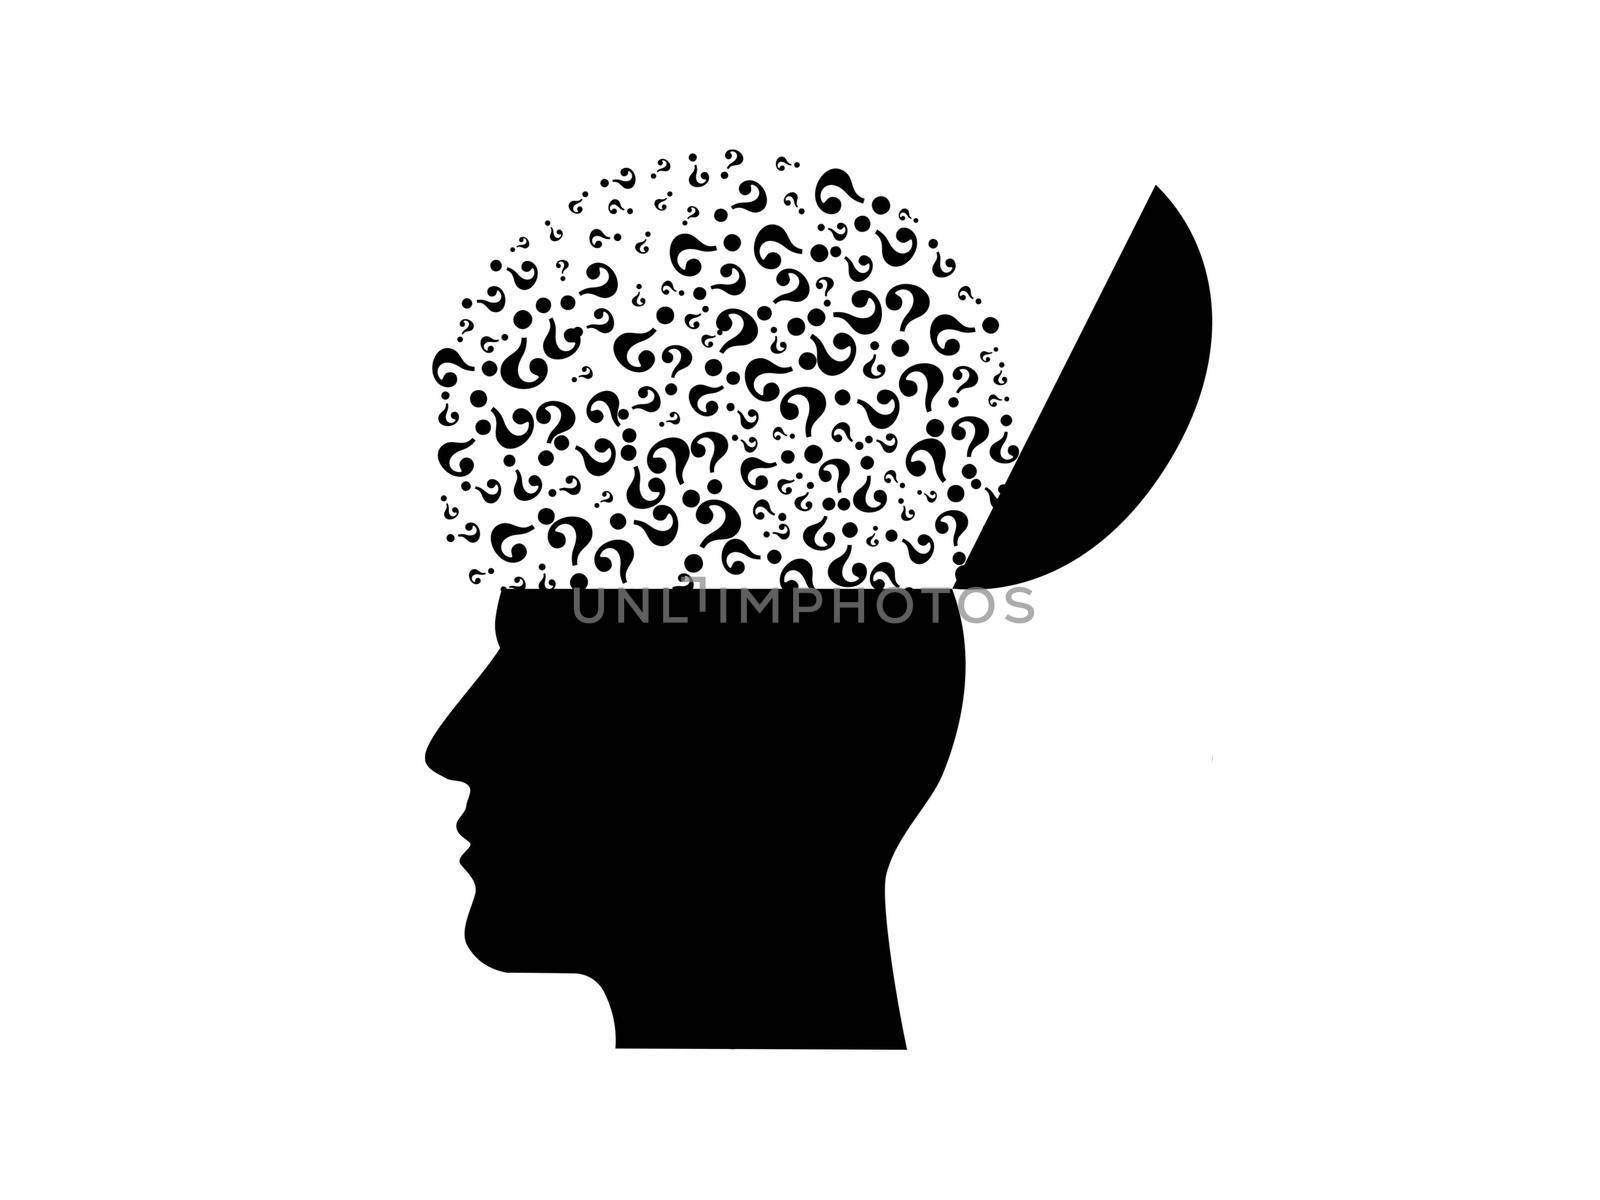 several questions about black the brain on white background - 3d rendering